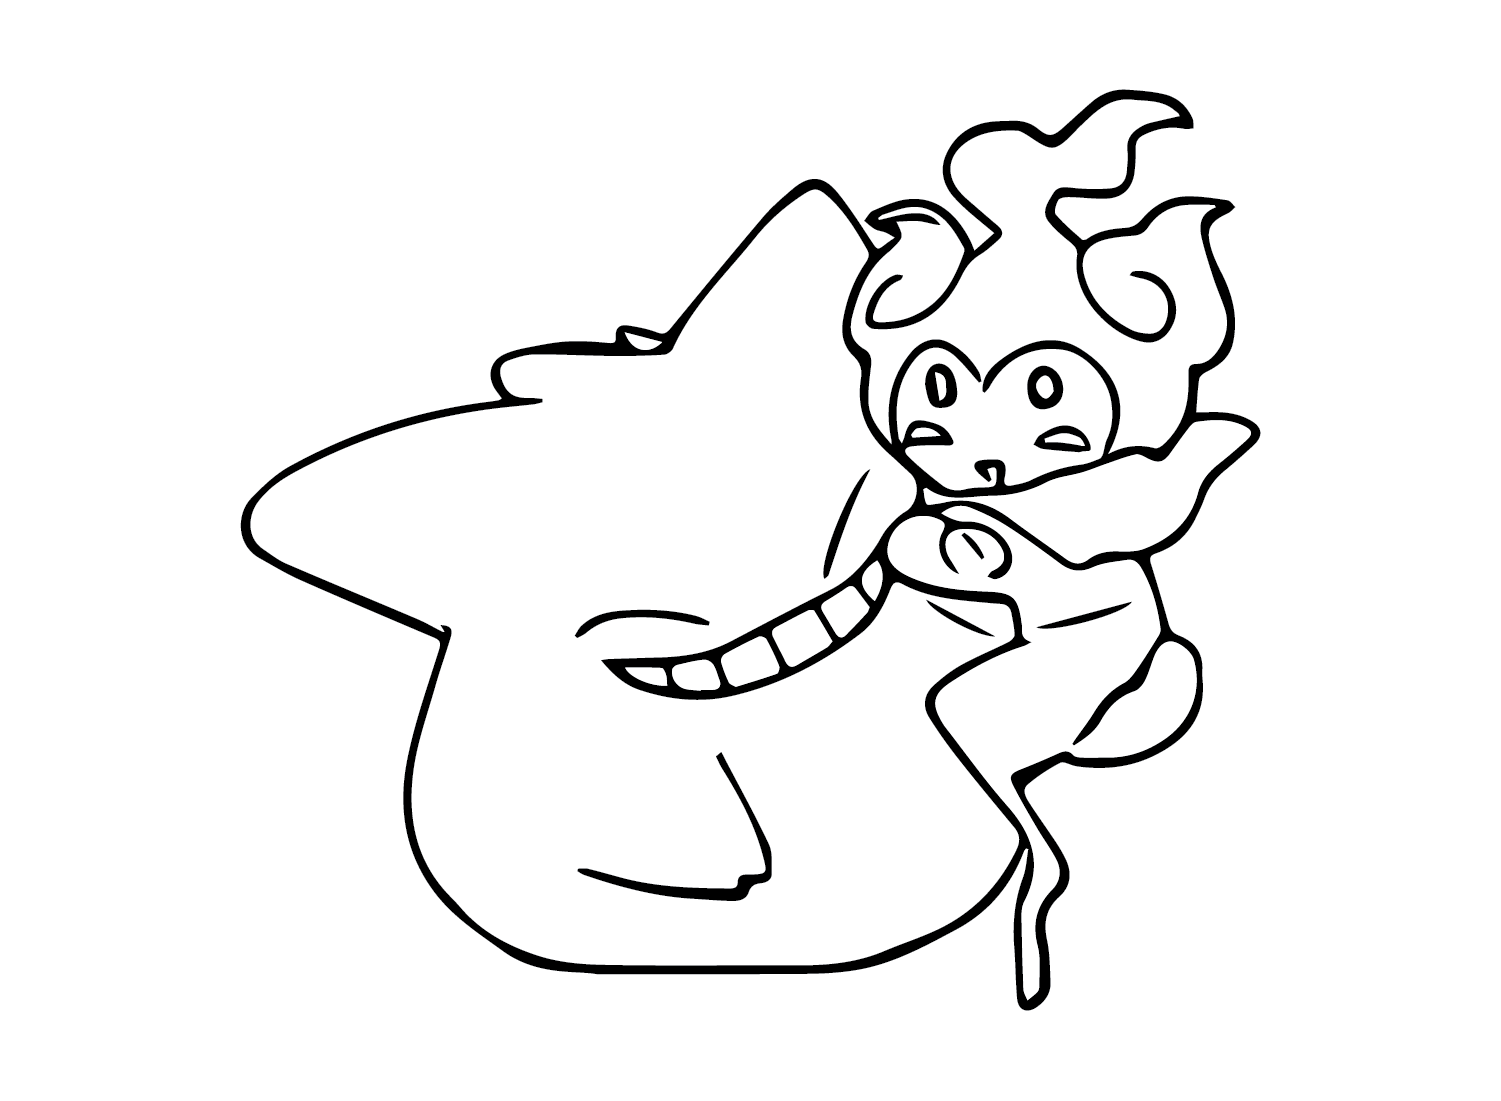 Marshadow Images Coloring Page